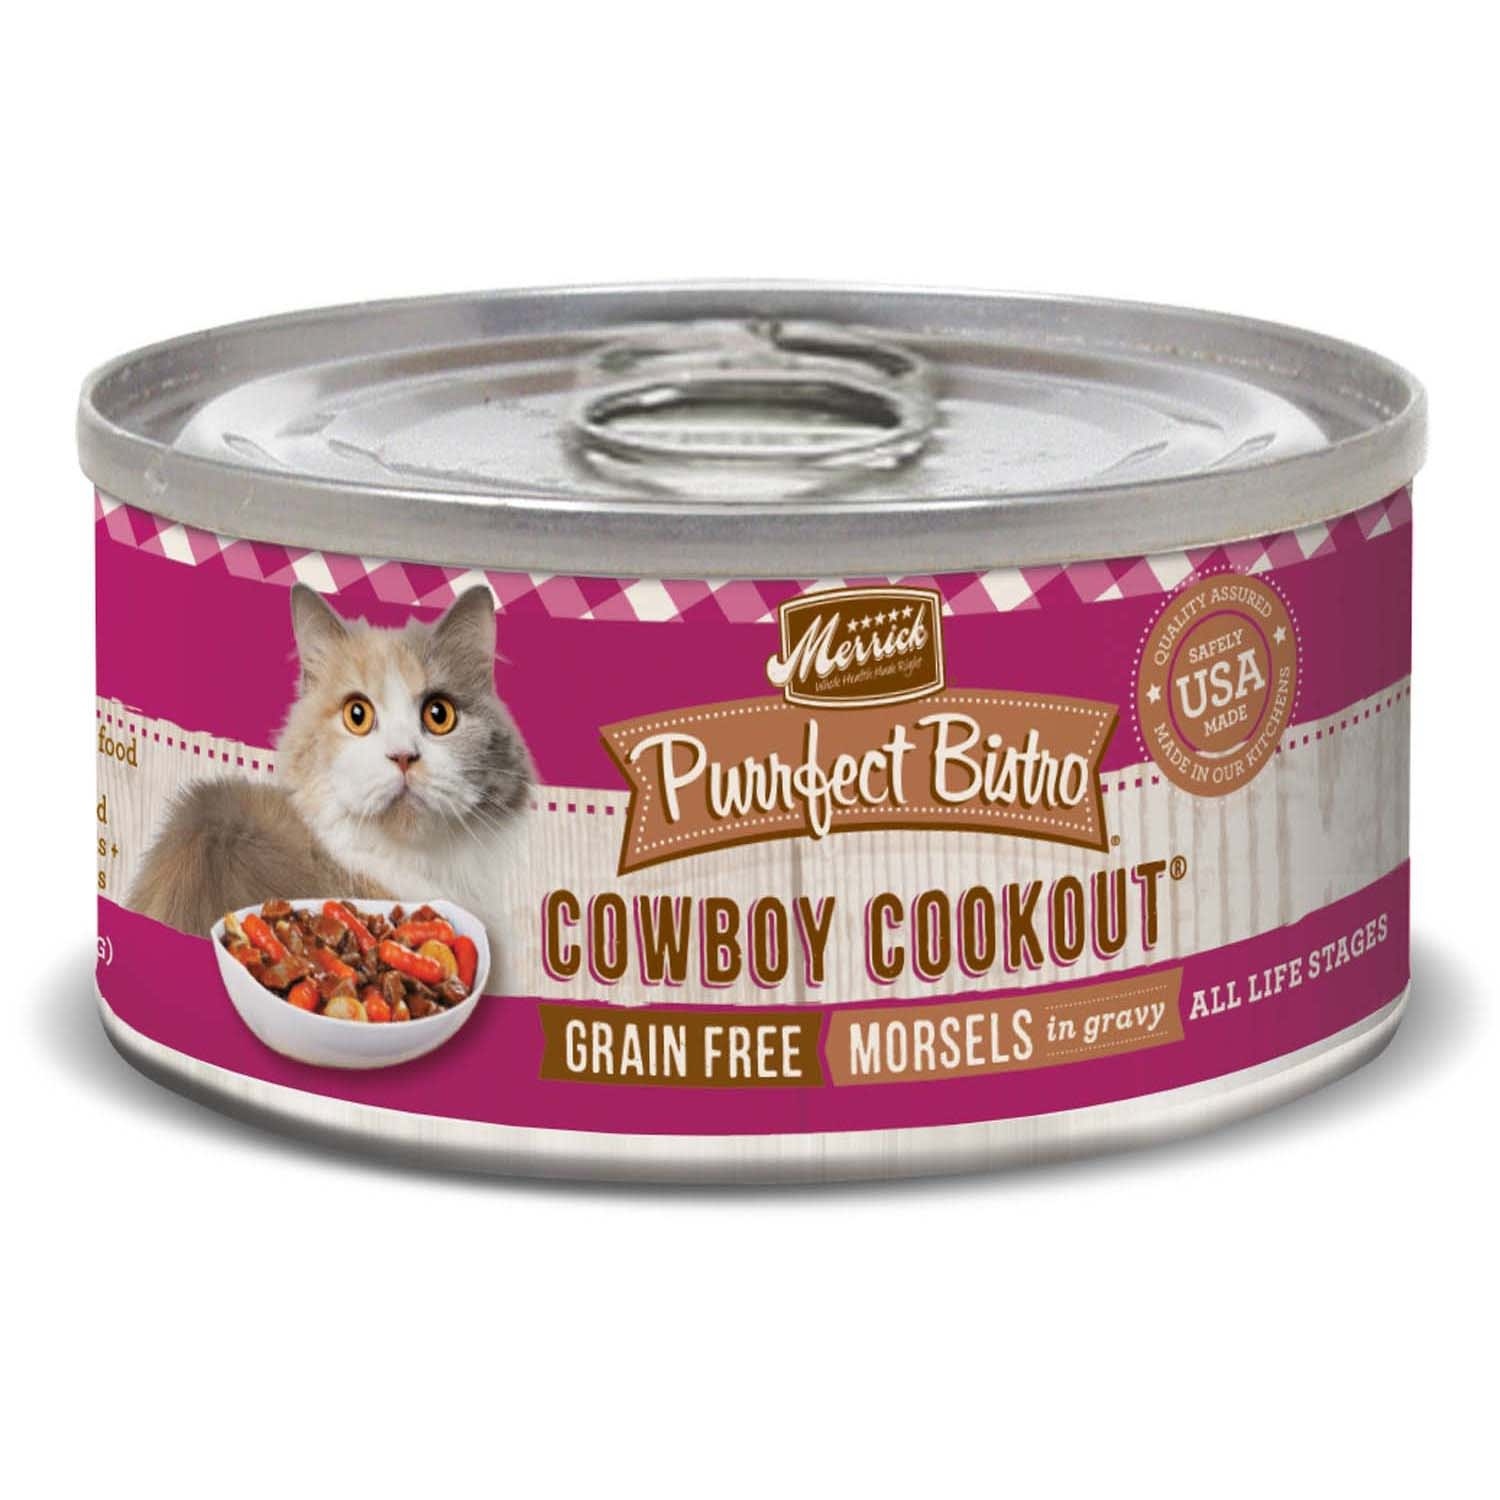 slide 1 of 1, Merrick Purrfect Bistro Grain Free Cowboy Cookout Canned Cat Food, 3 oz